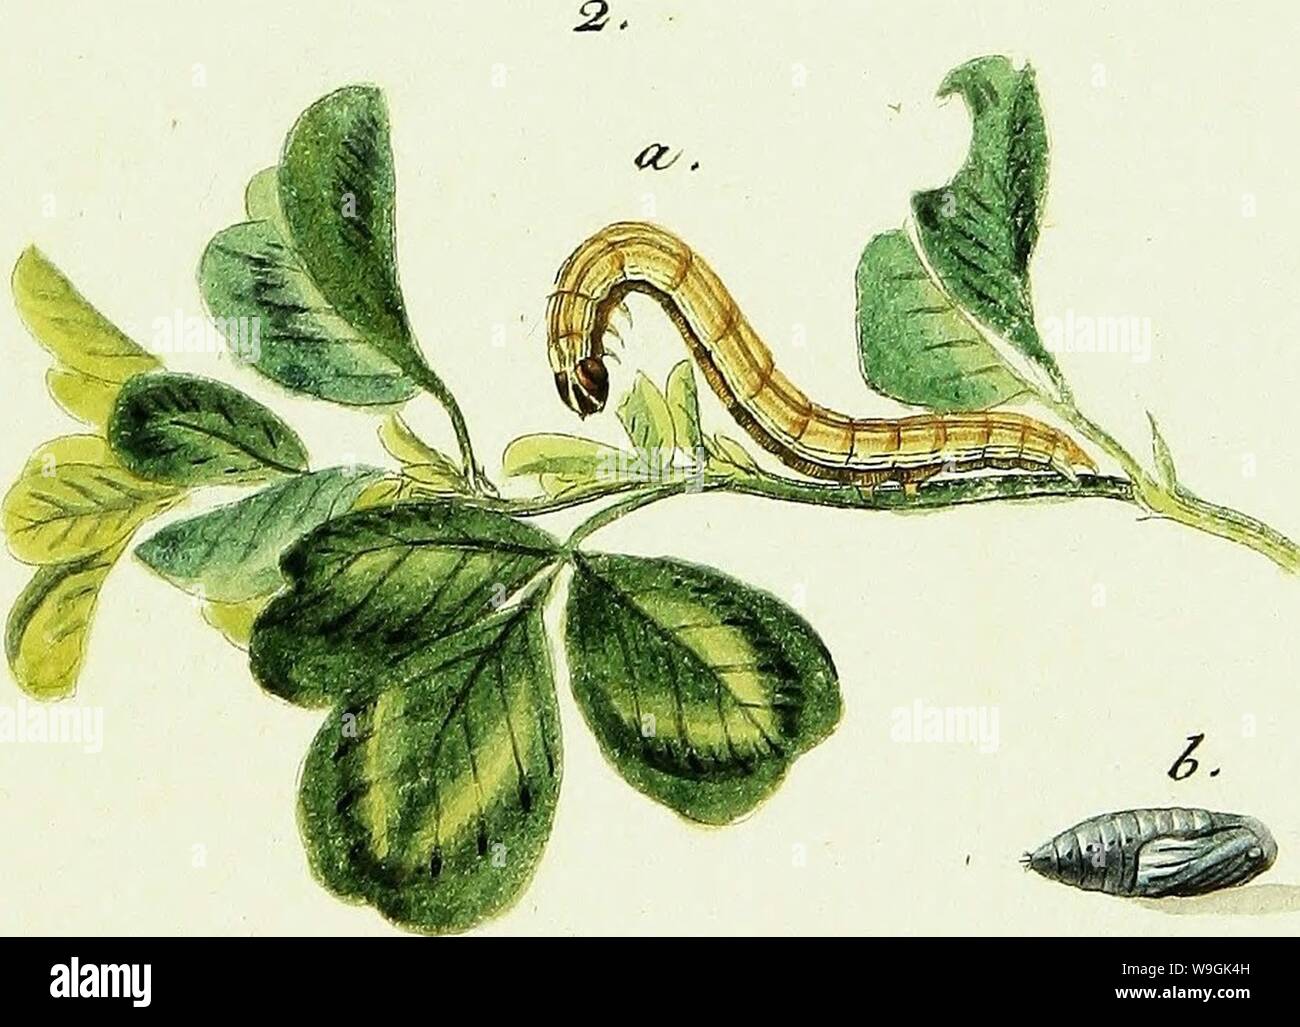 Archive image from page 260 of Geschichte europäischer Schmetterlinge (1806). Geschichte europäischer Schmetterlinge  CUbiodiversity1742385-9606 Year: 1806 ( . /, o . •2. a. /. &lupnic Stock Photo